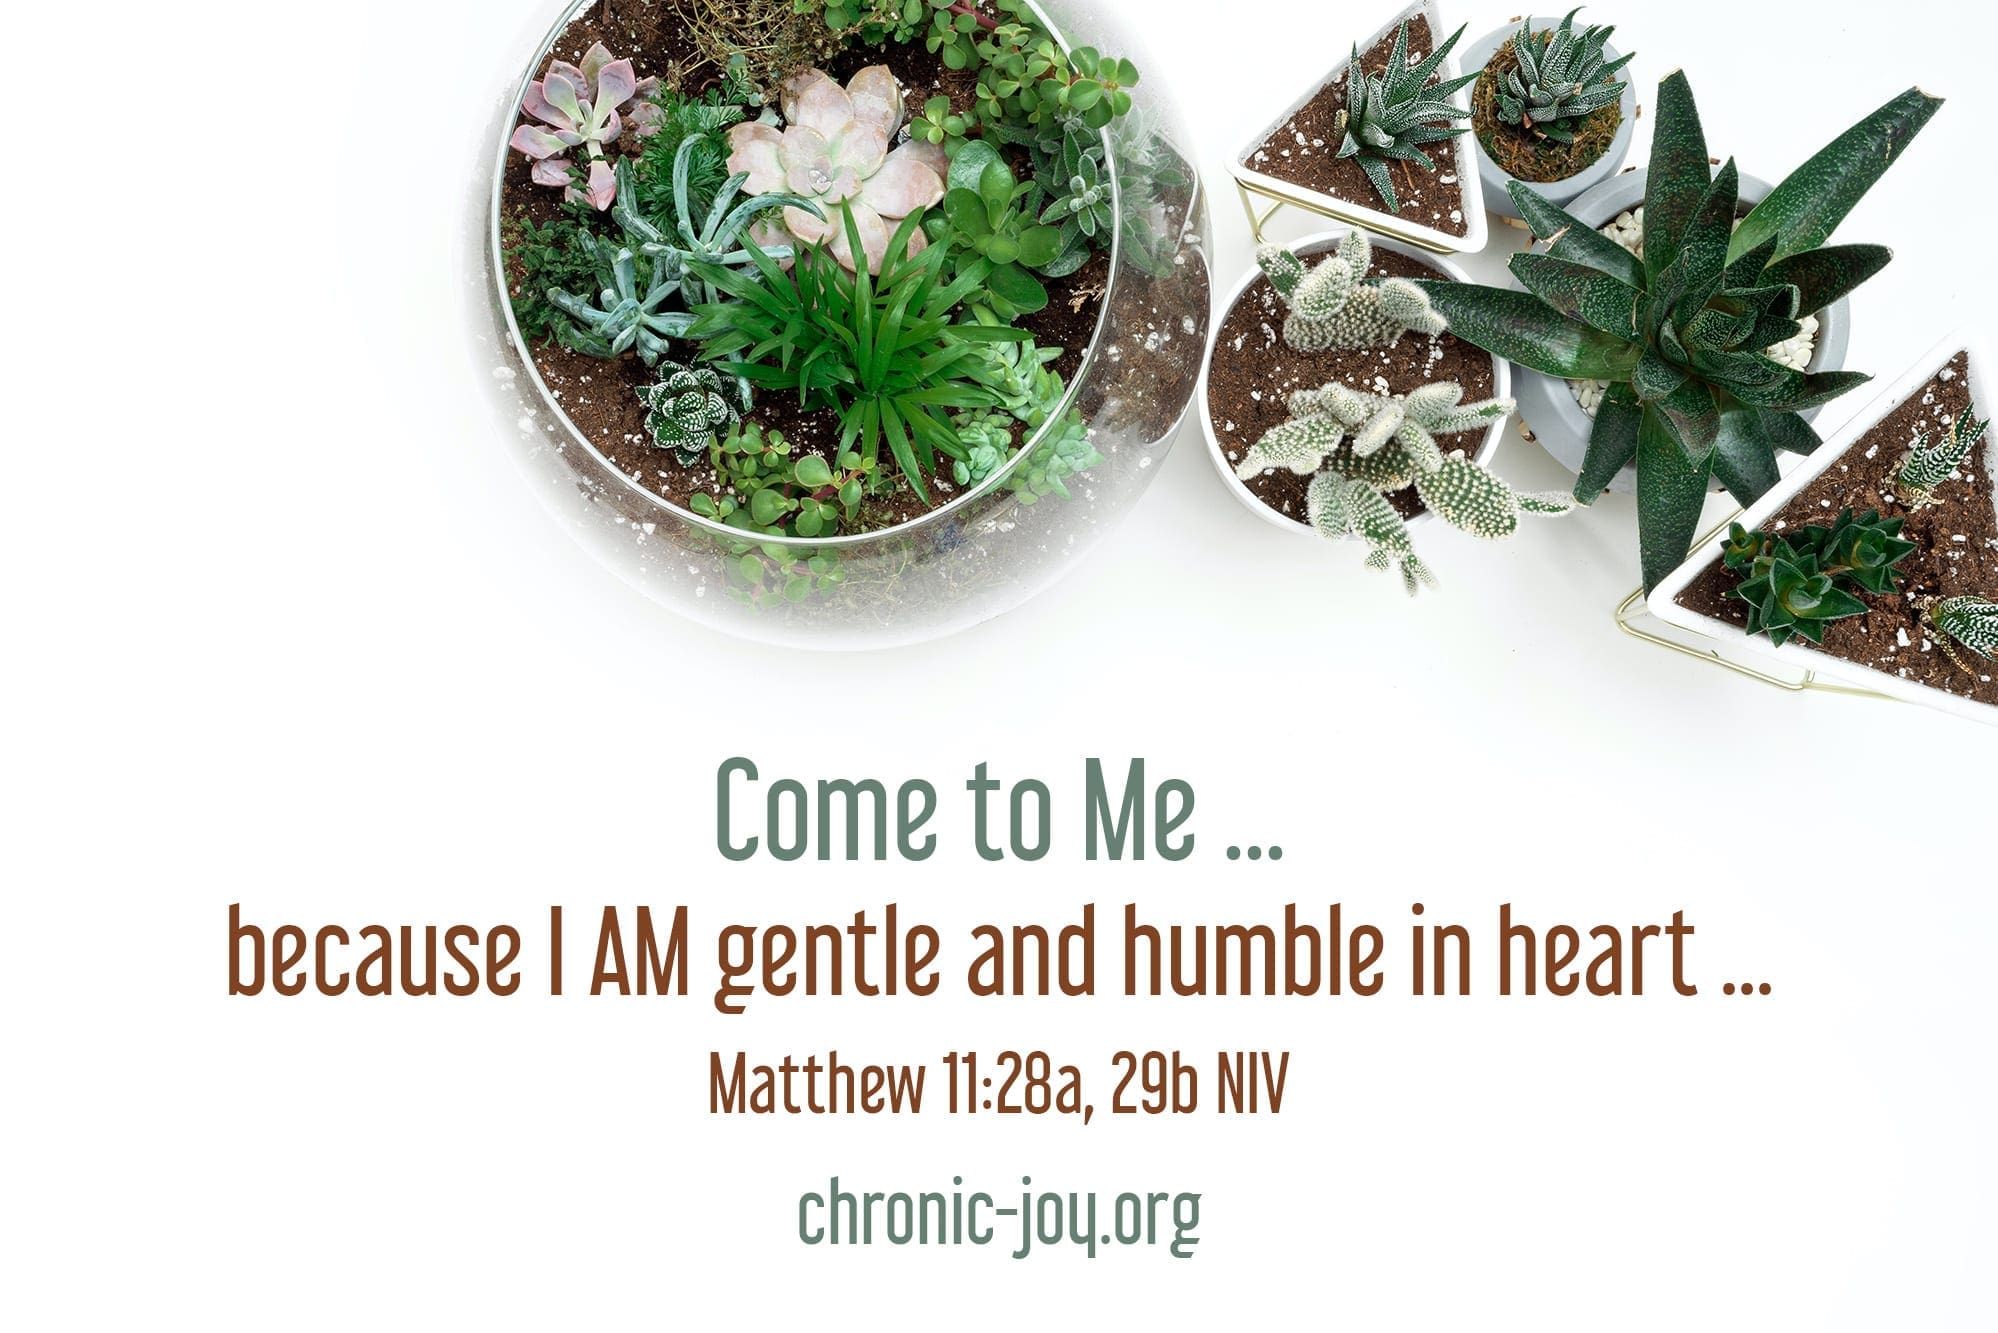 "Come to Me ... because I am gentle and humble in heart ..." Matthew 11:28a, 29b NIV